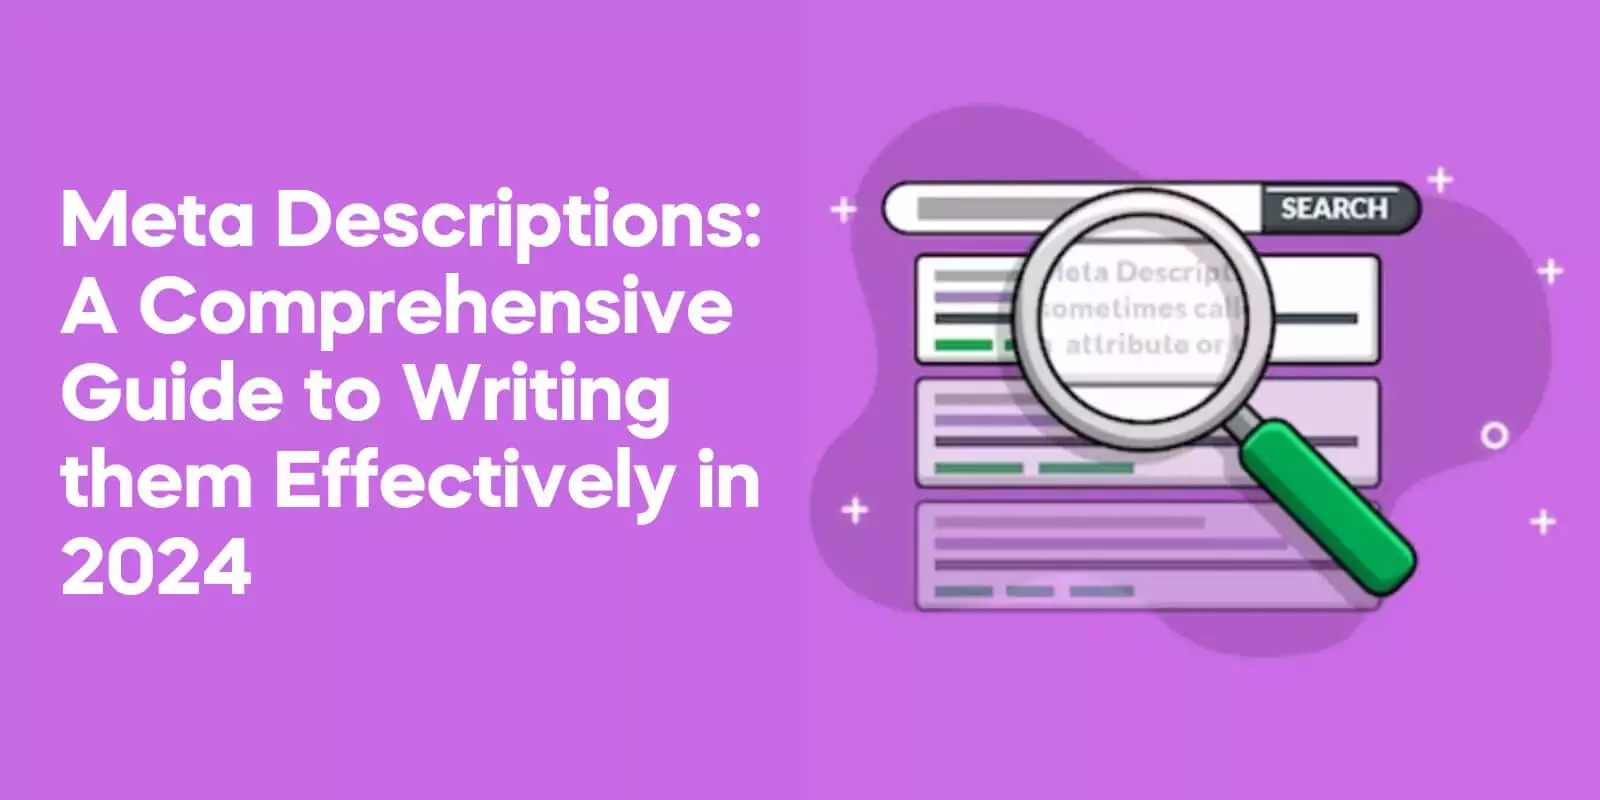 Meta Descriptions A Comprehensive Guide to Writing them Effectively in 2024